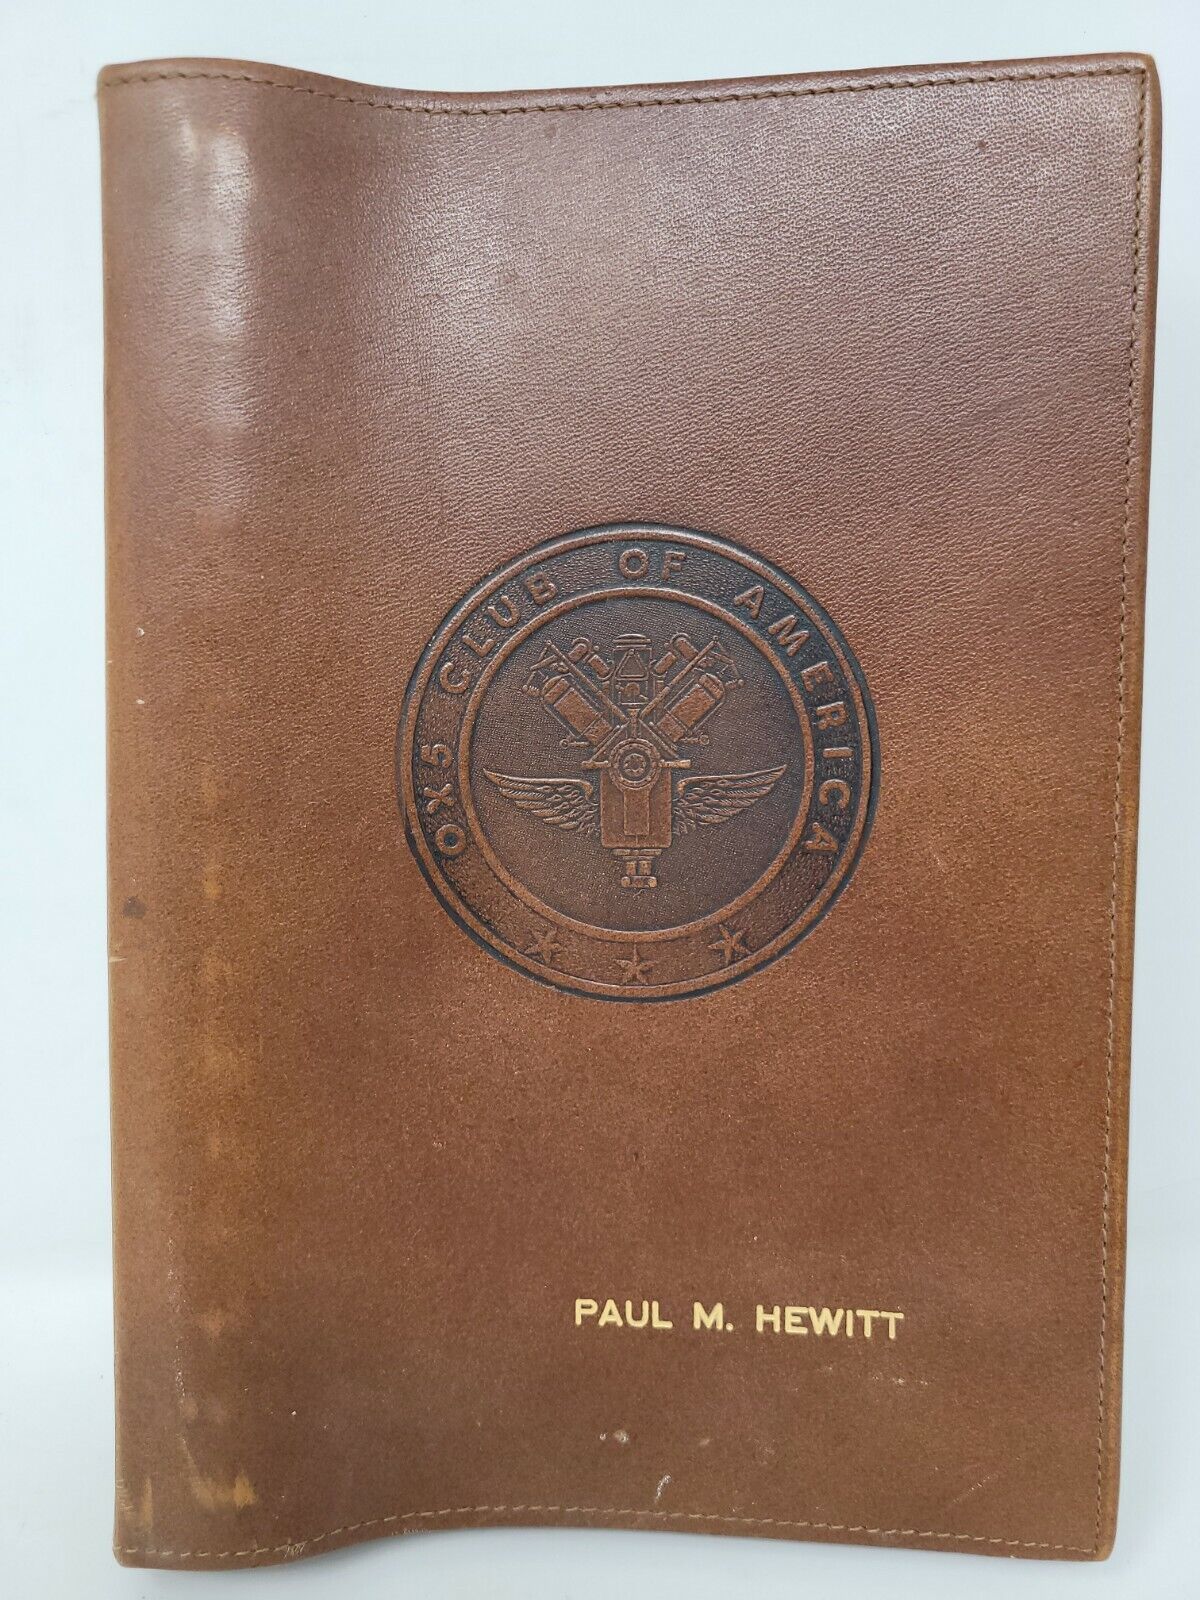 OX5 Club of America Aviation Pilots Roster Aug 1965 Leather Binder Paul M Hewitt